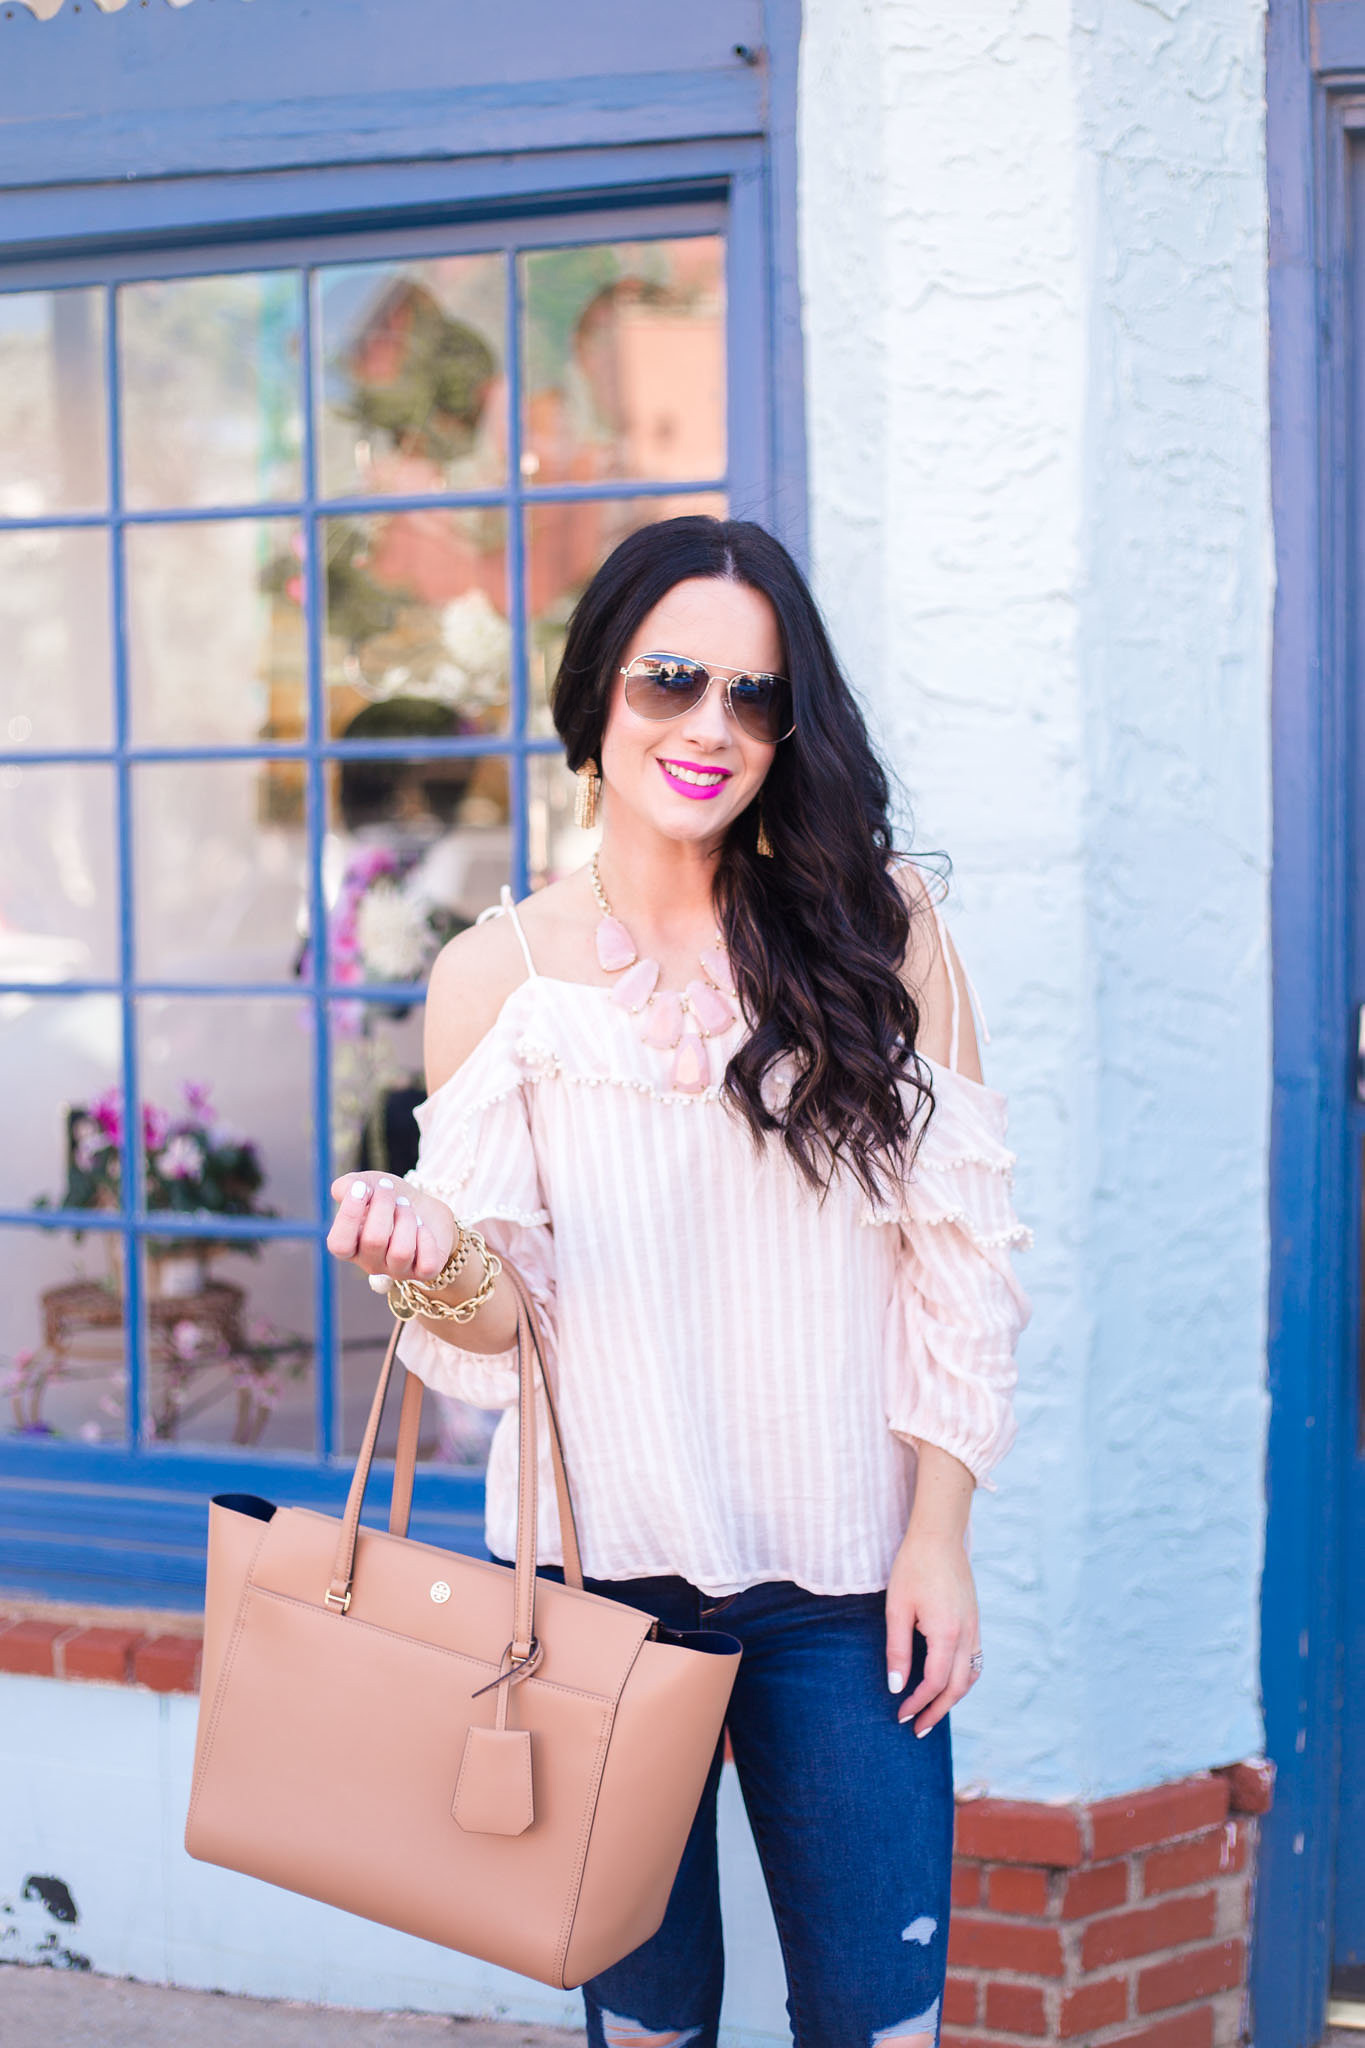 Blush & White Ruffle Tops For Summer | The Double Take Girls Sister Style